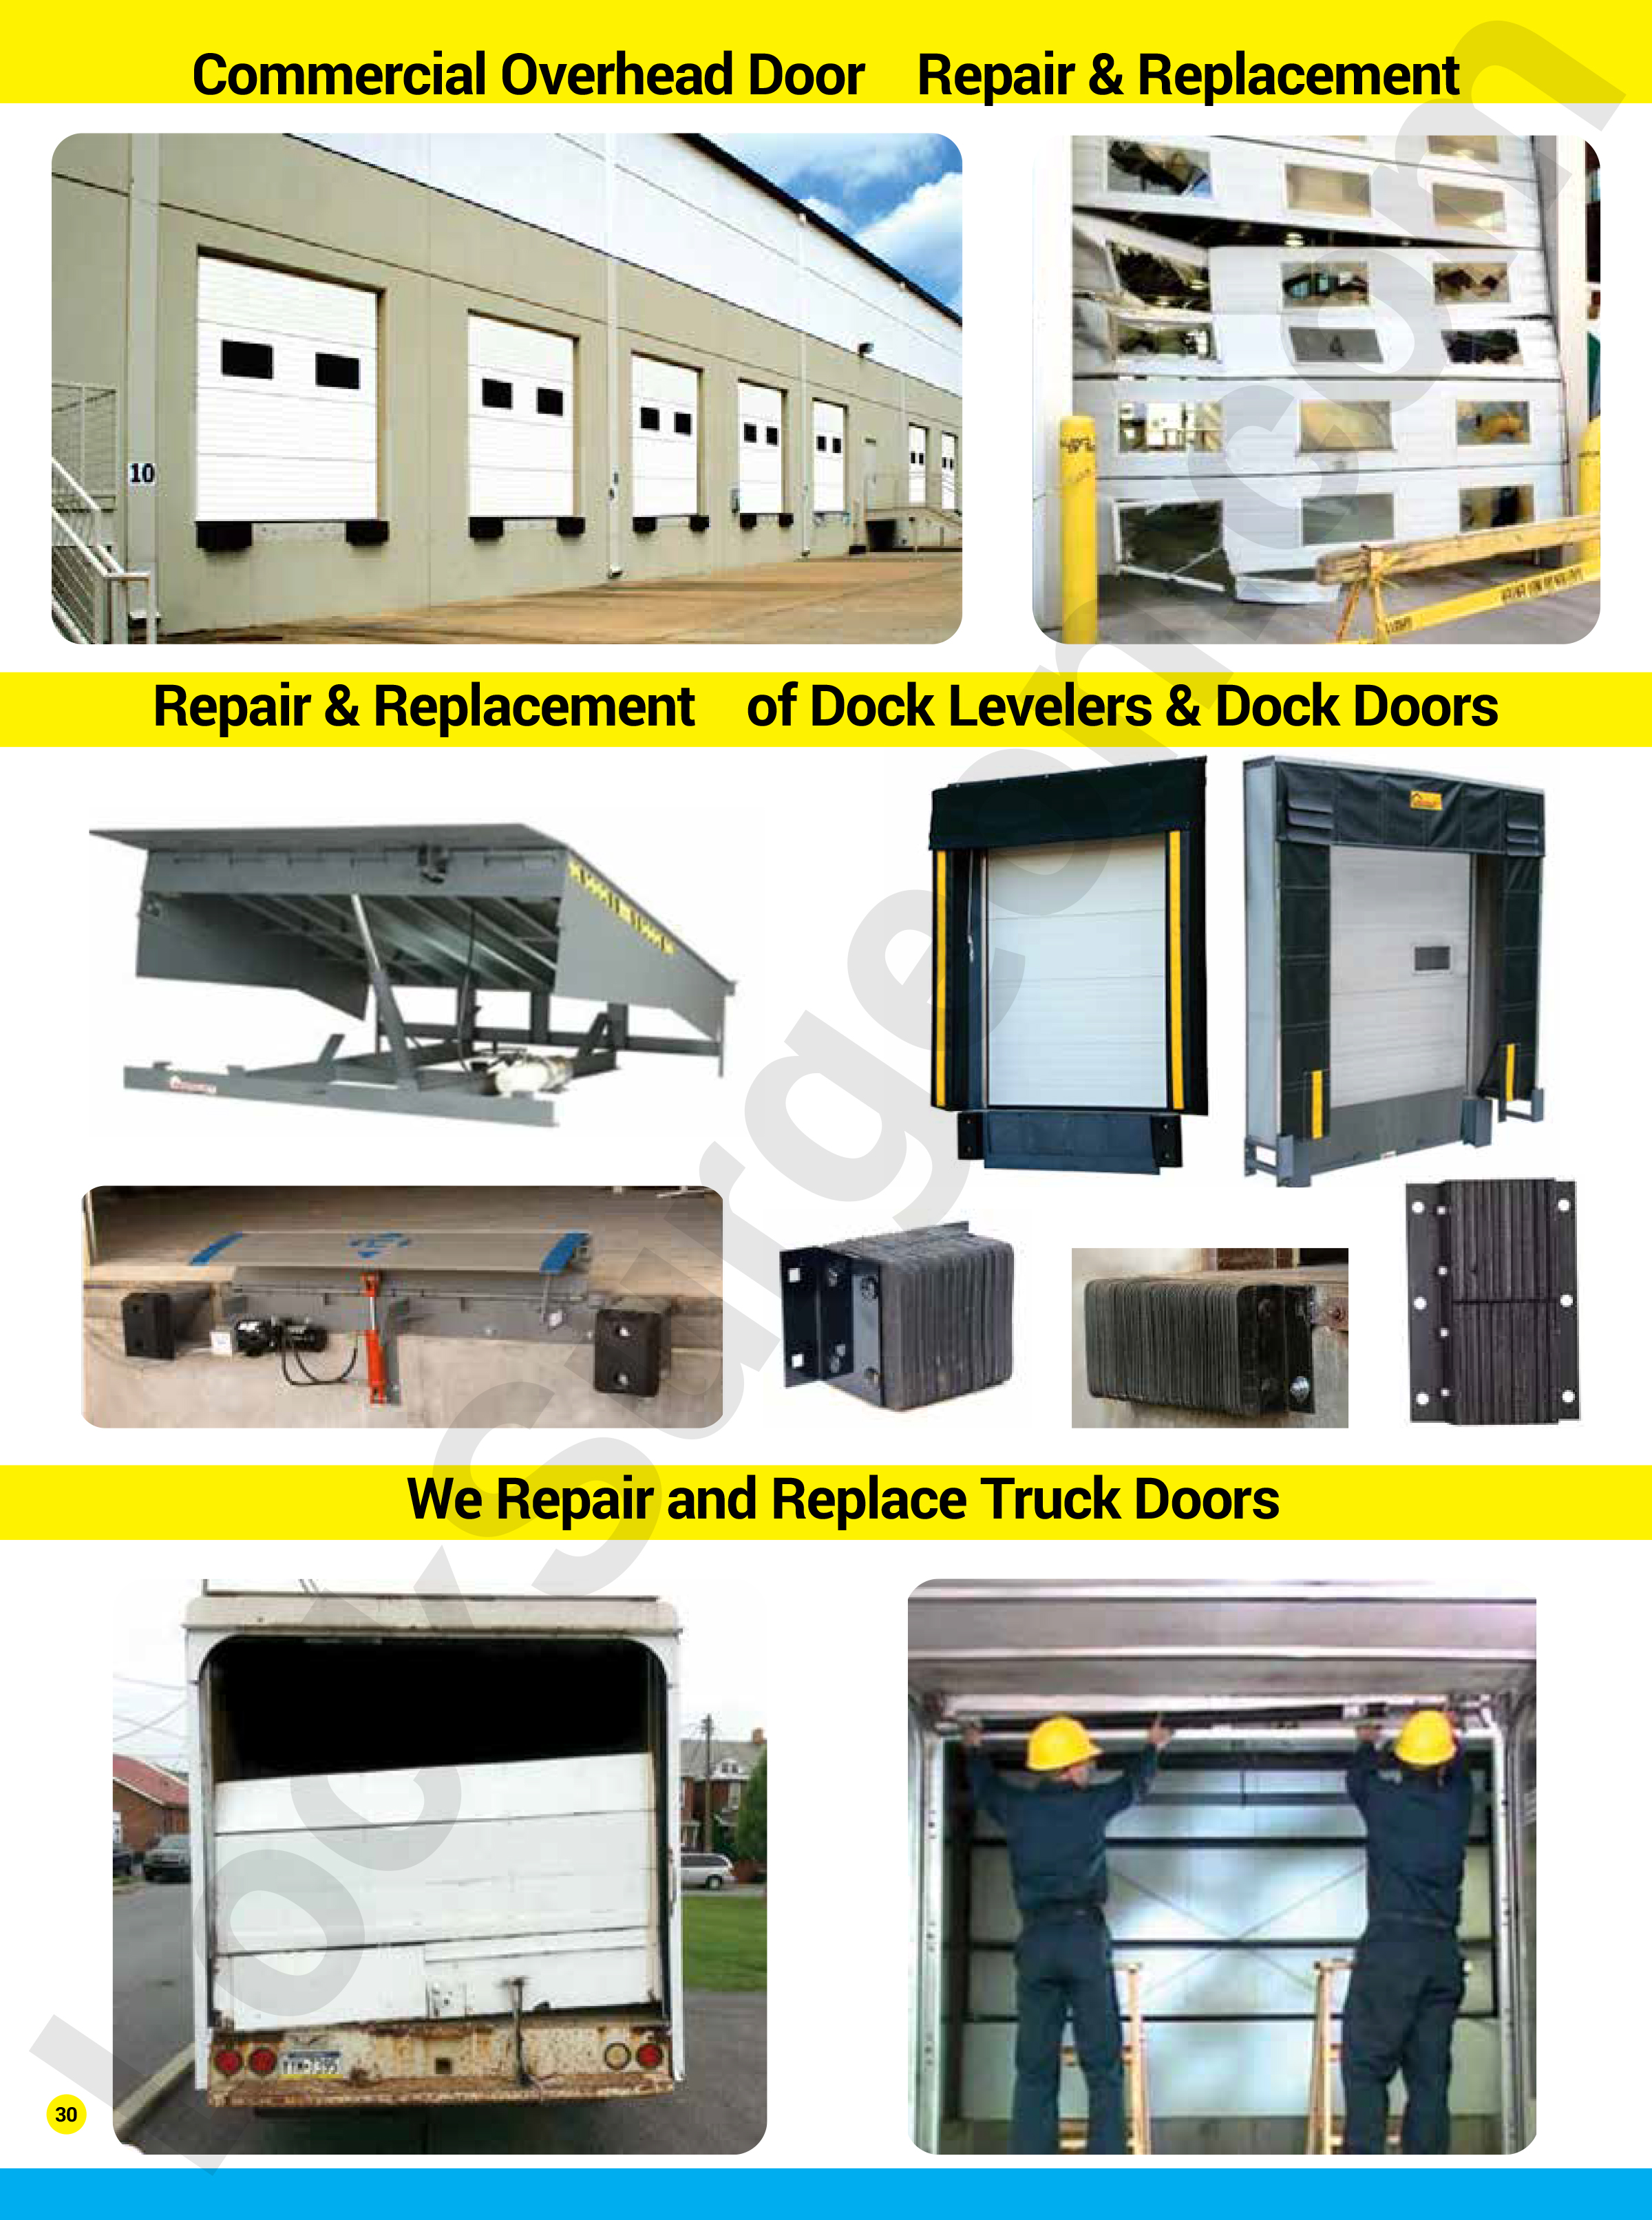 Lock Surgeon professional locksmiths mobile repair or replacement of commercial overhead doors.